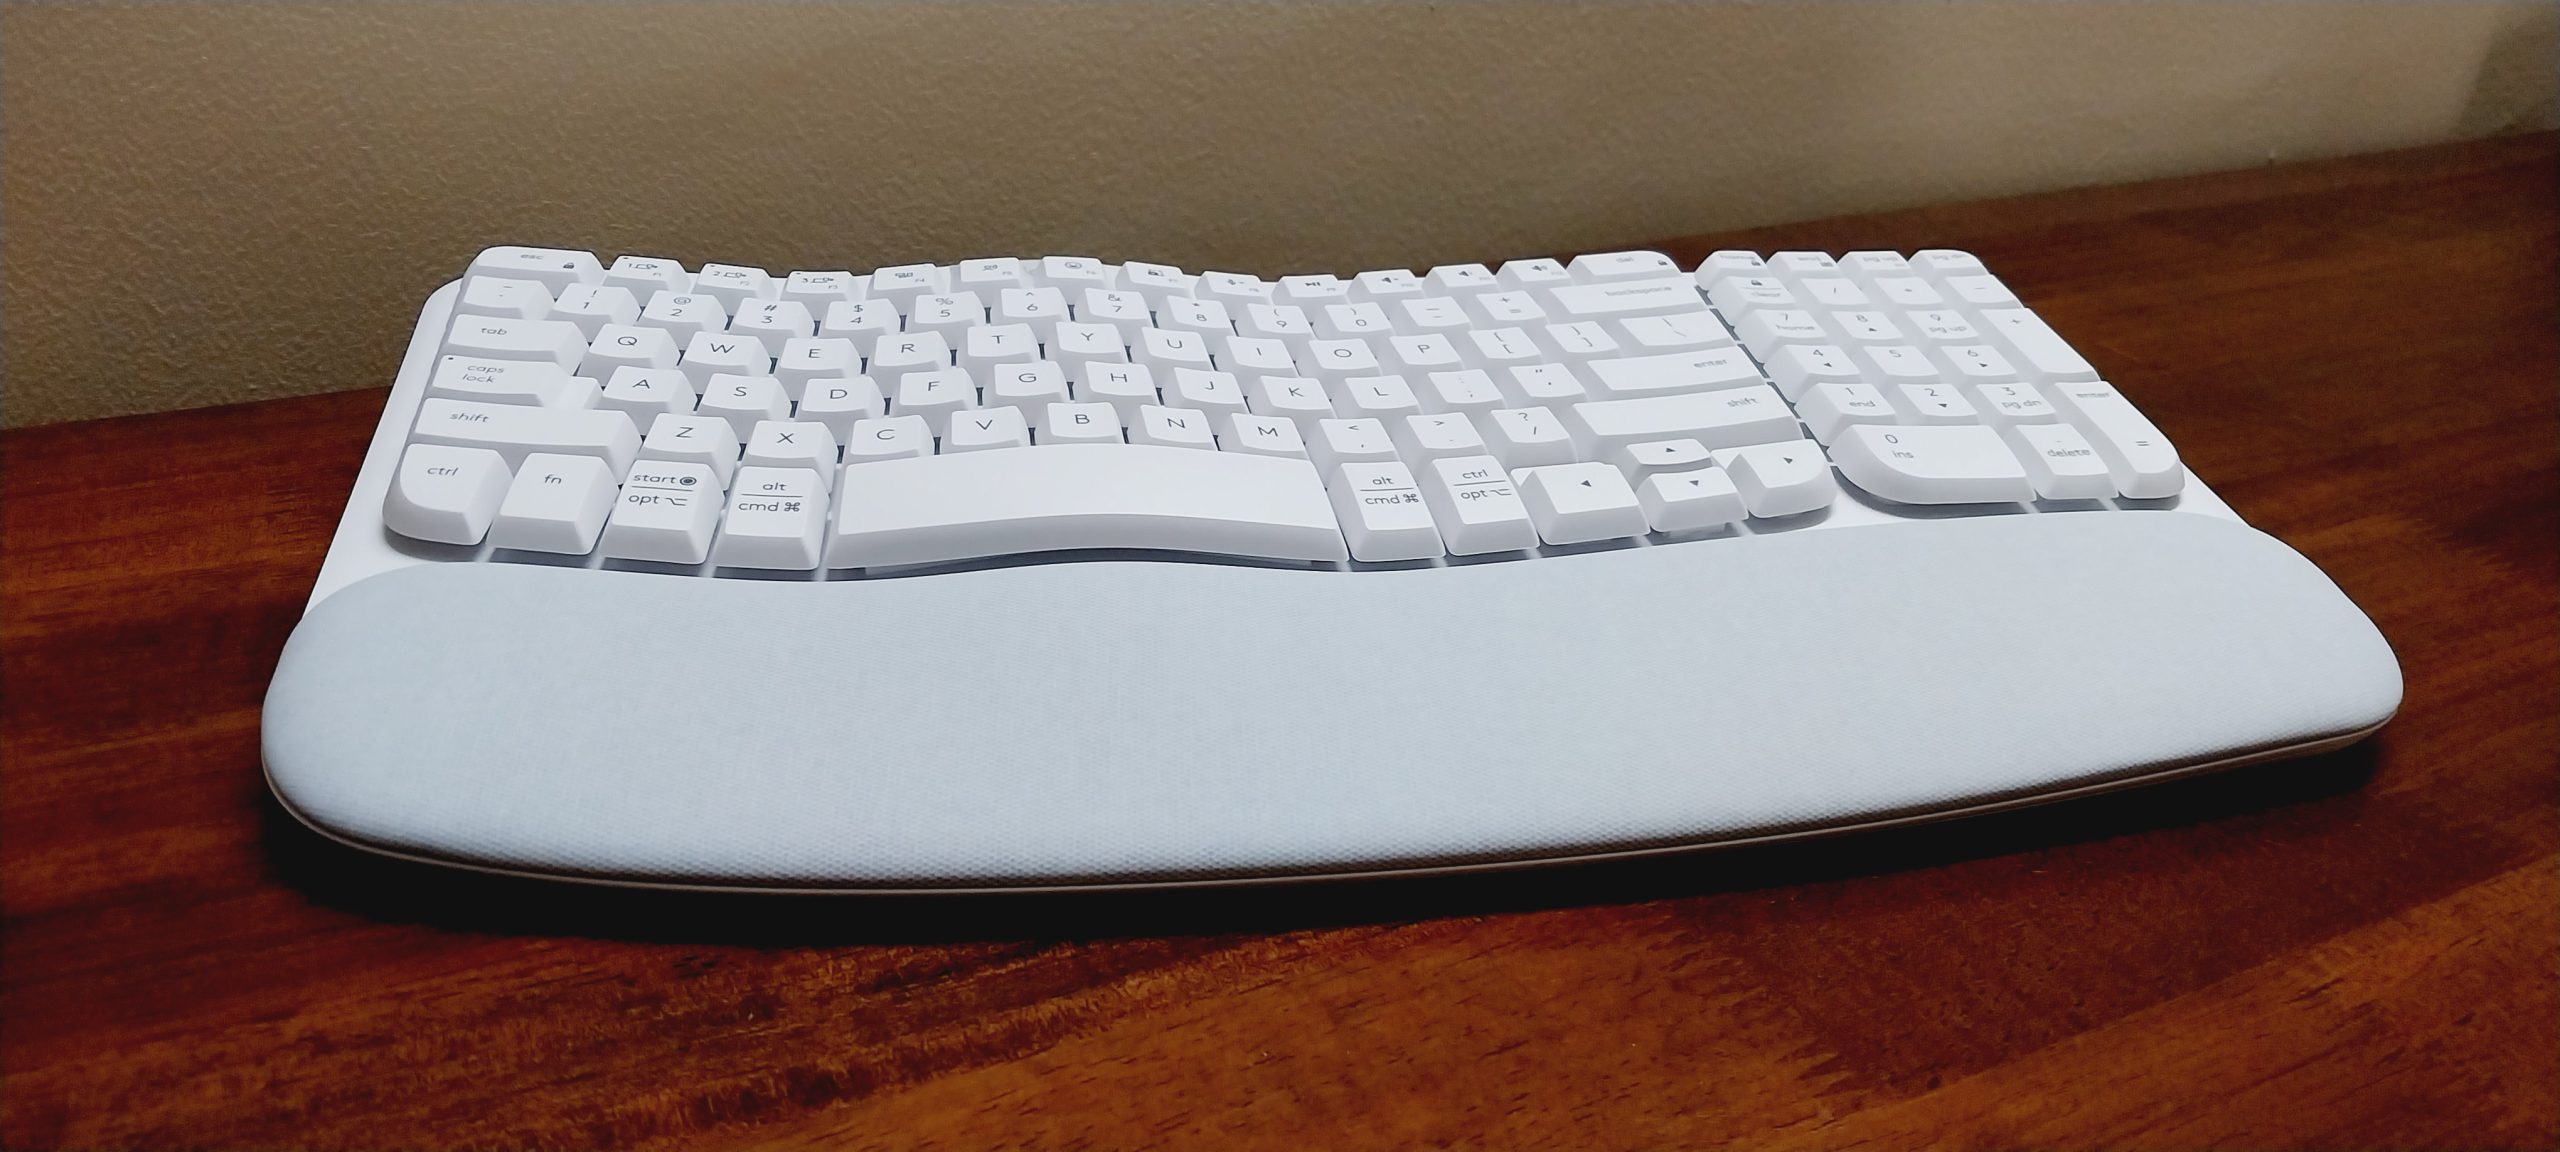 Logitech Wave Keys Keyboard - Pairing and Compatibility